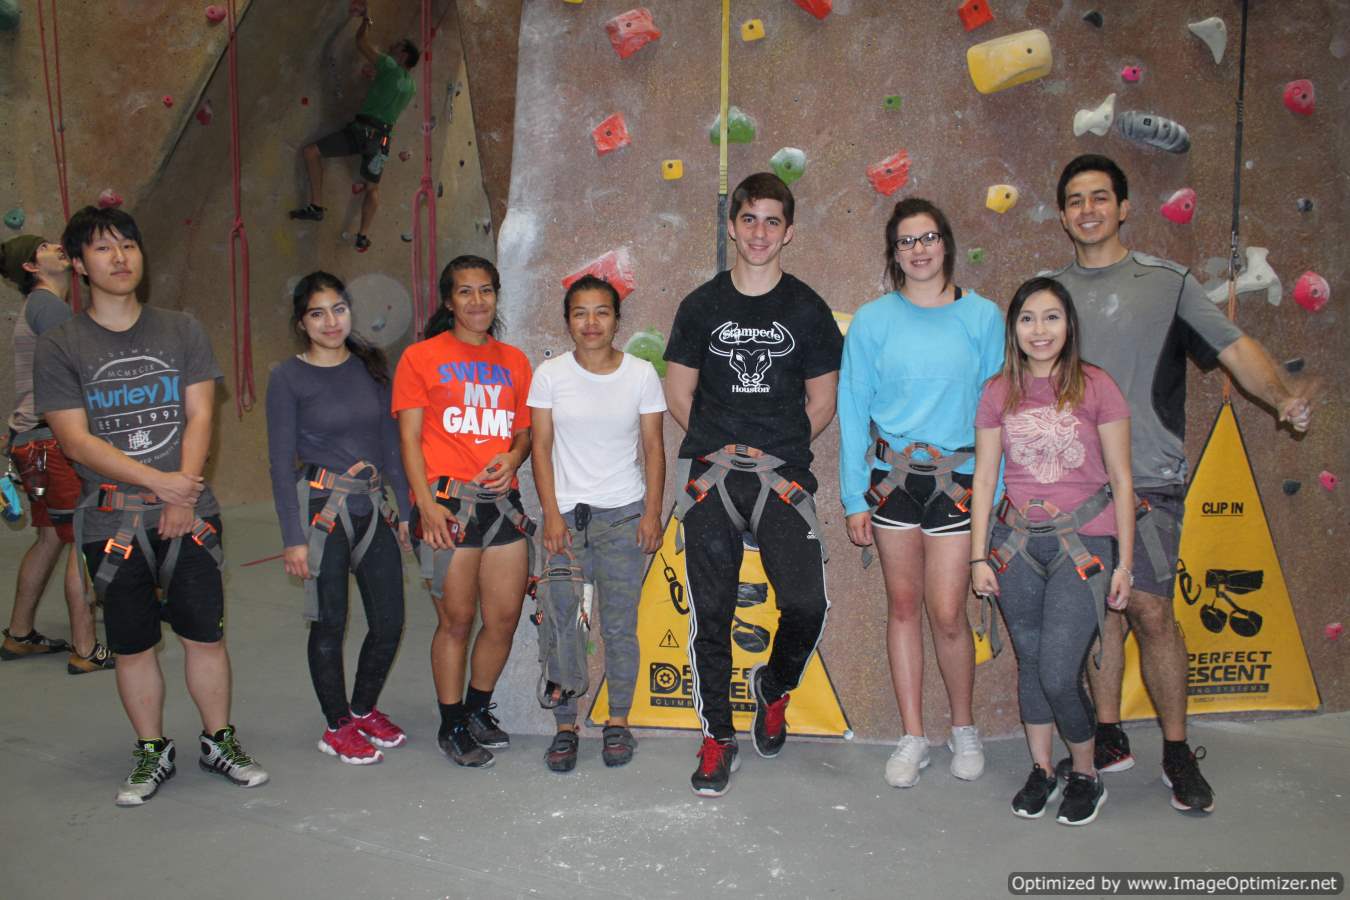 Group photo of students posing for photo at indoor climbing place